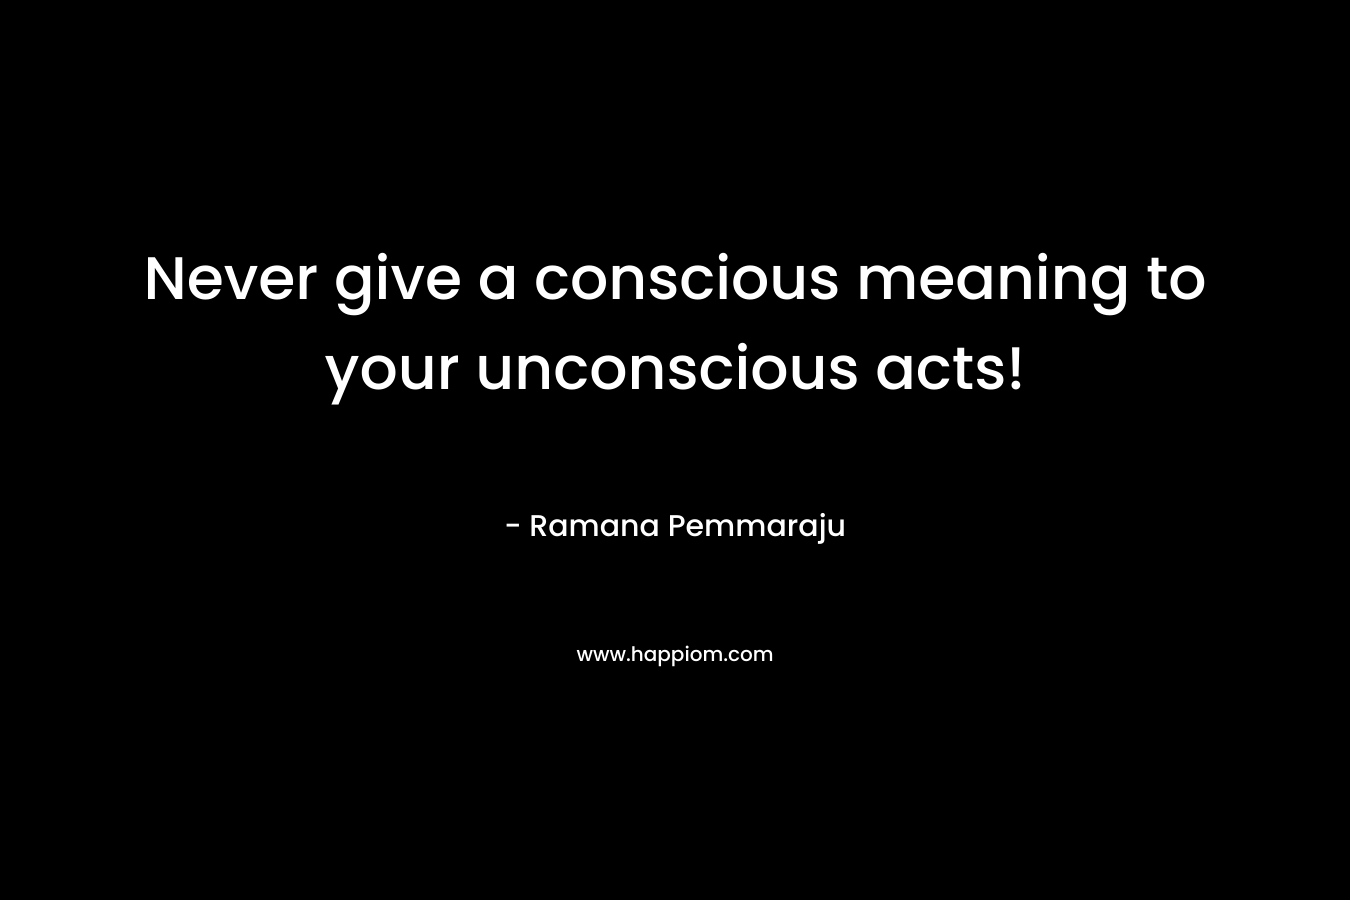 Never give a conscious meaning to your unconscious acts!